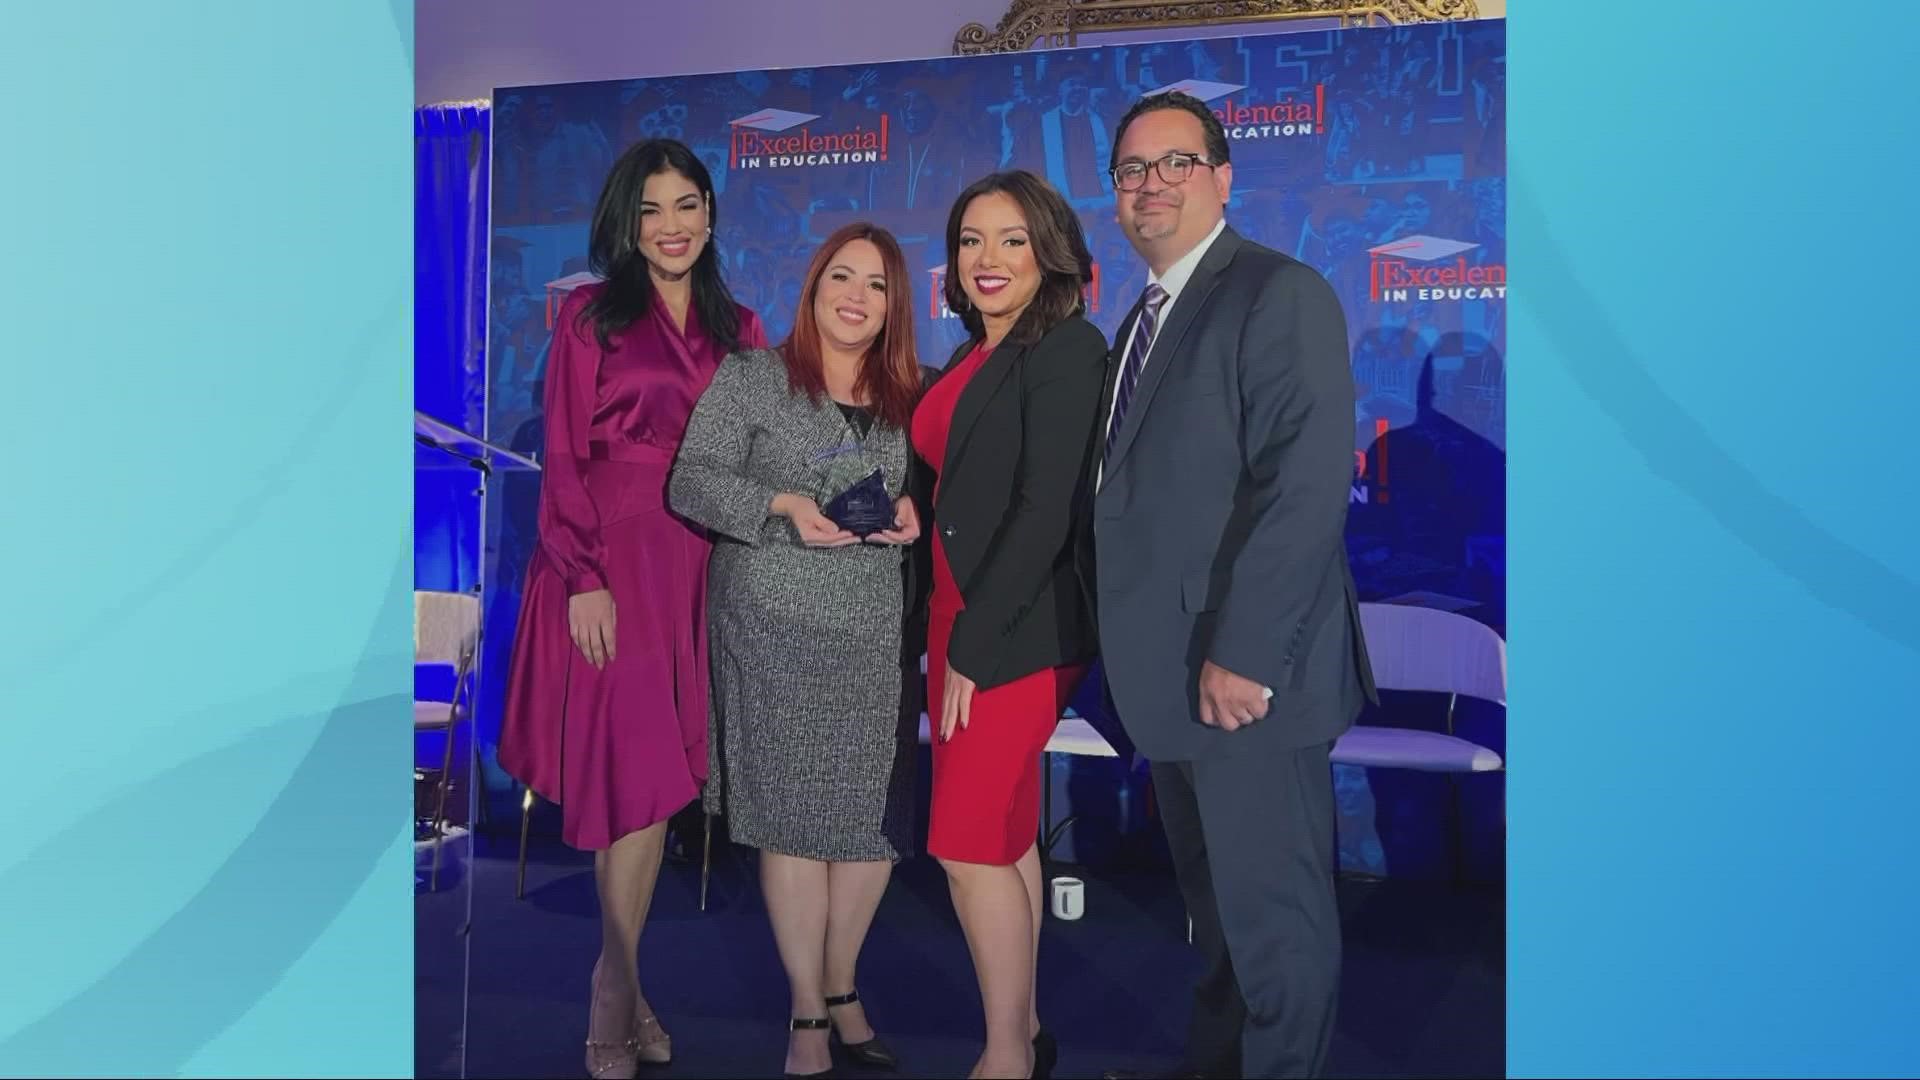 Esperanza Inc. was honored for accelerating achievement in higher education among area Hispanics.